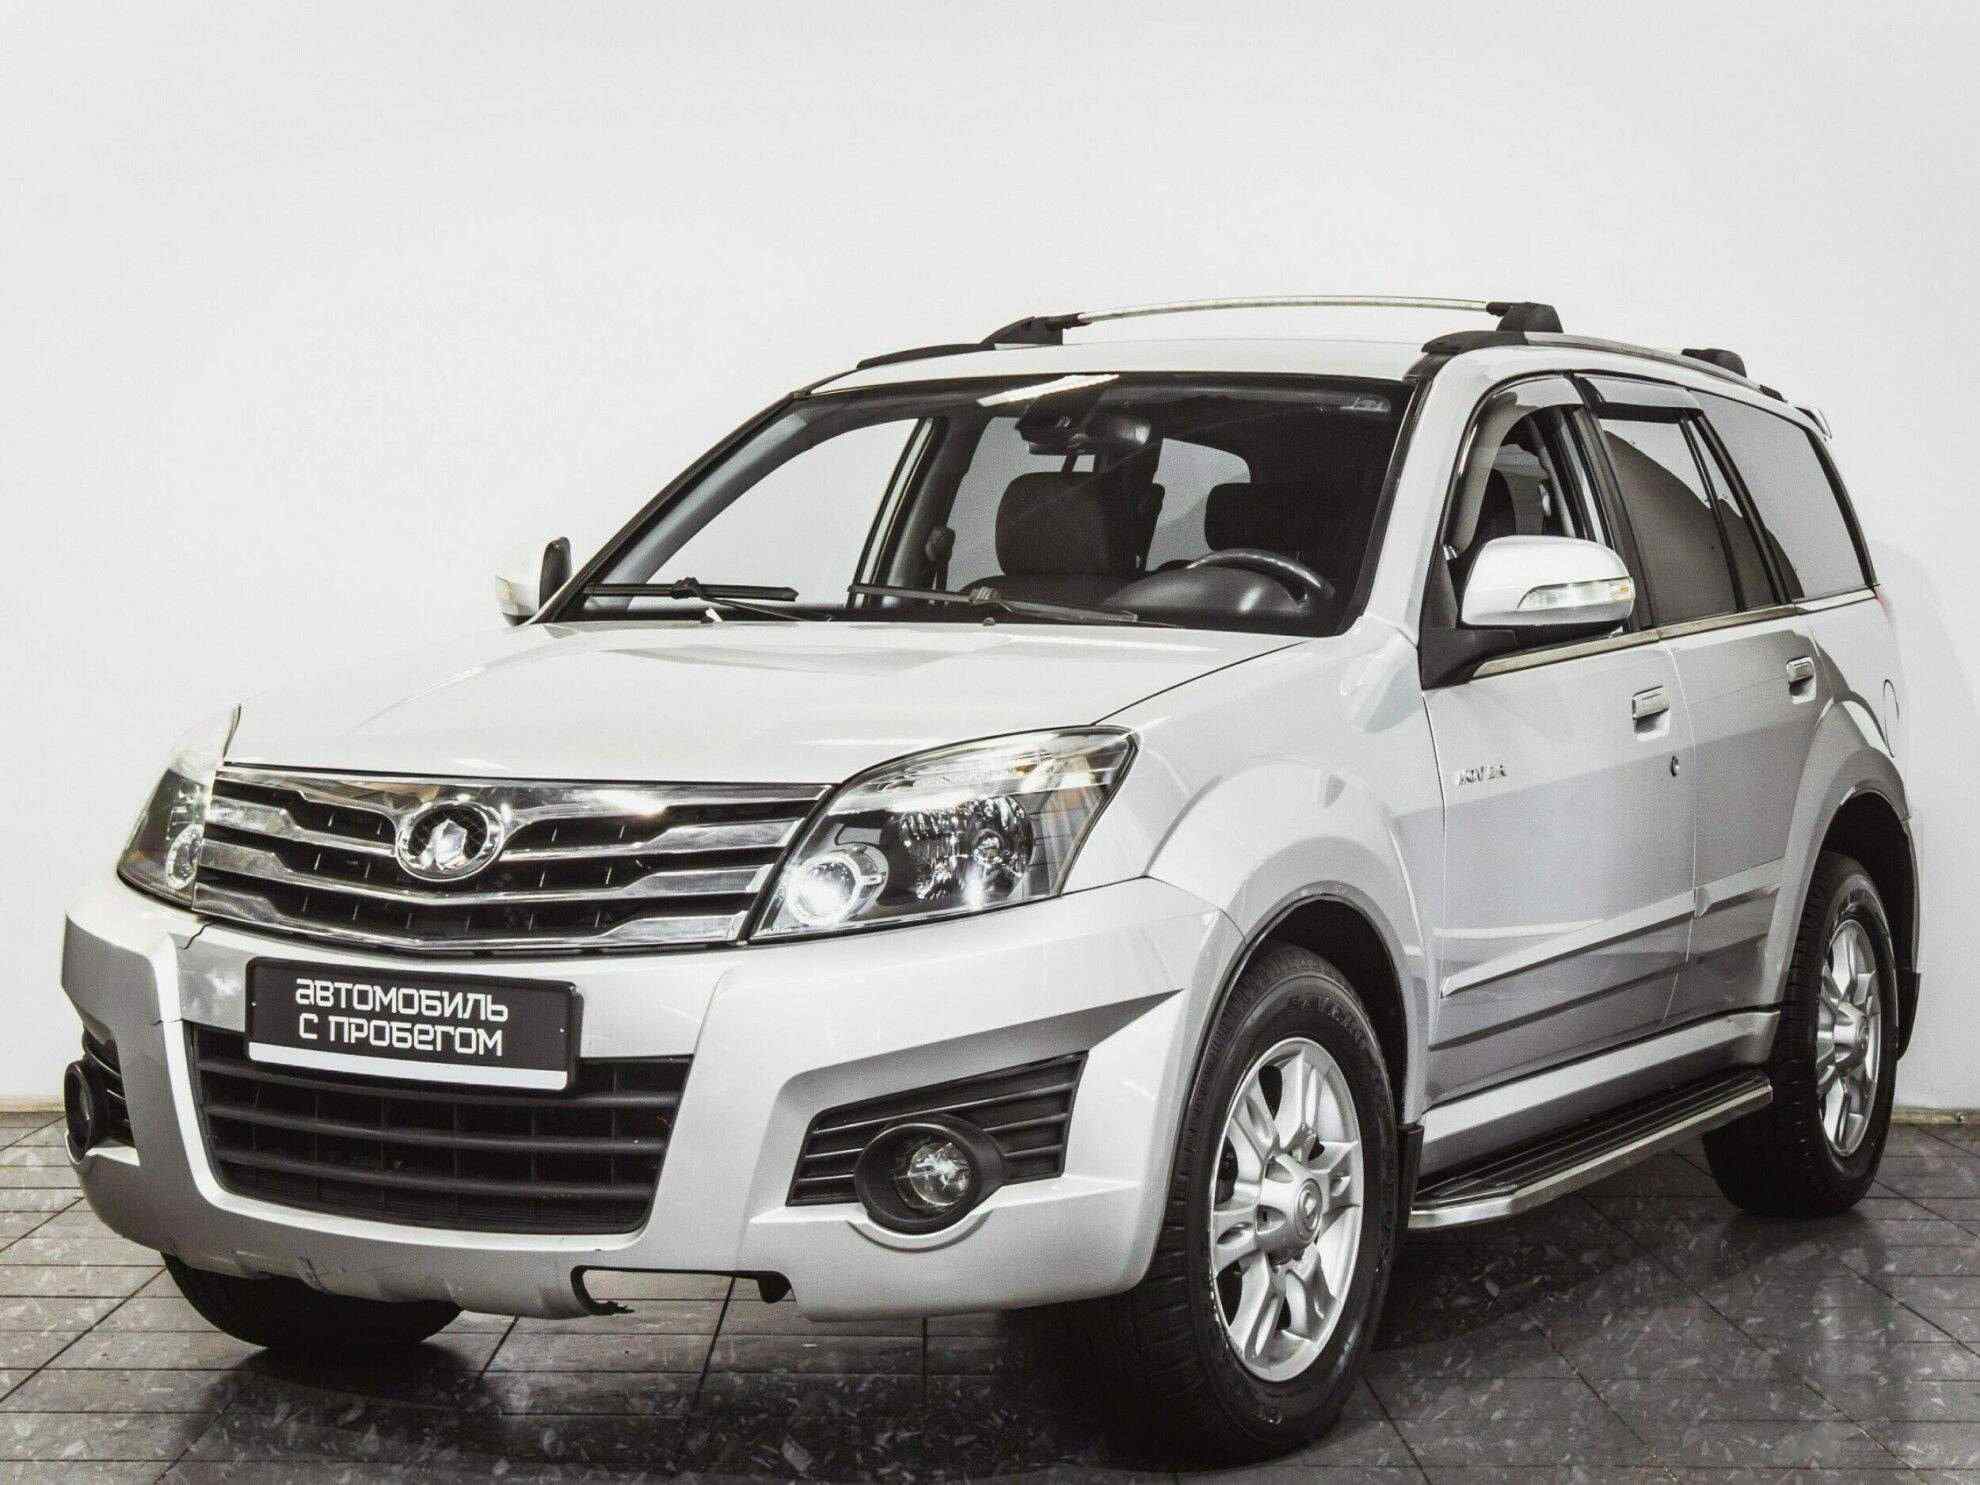 Каталог hover. Great Wall Hover 3787210k00. Great Wall | Haval 8505300p00 - замок.